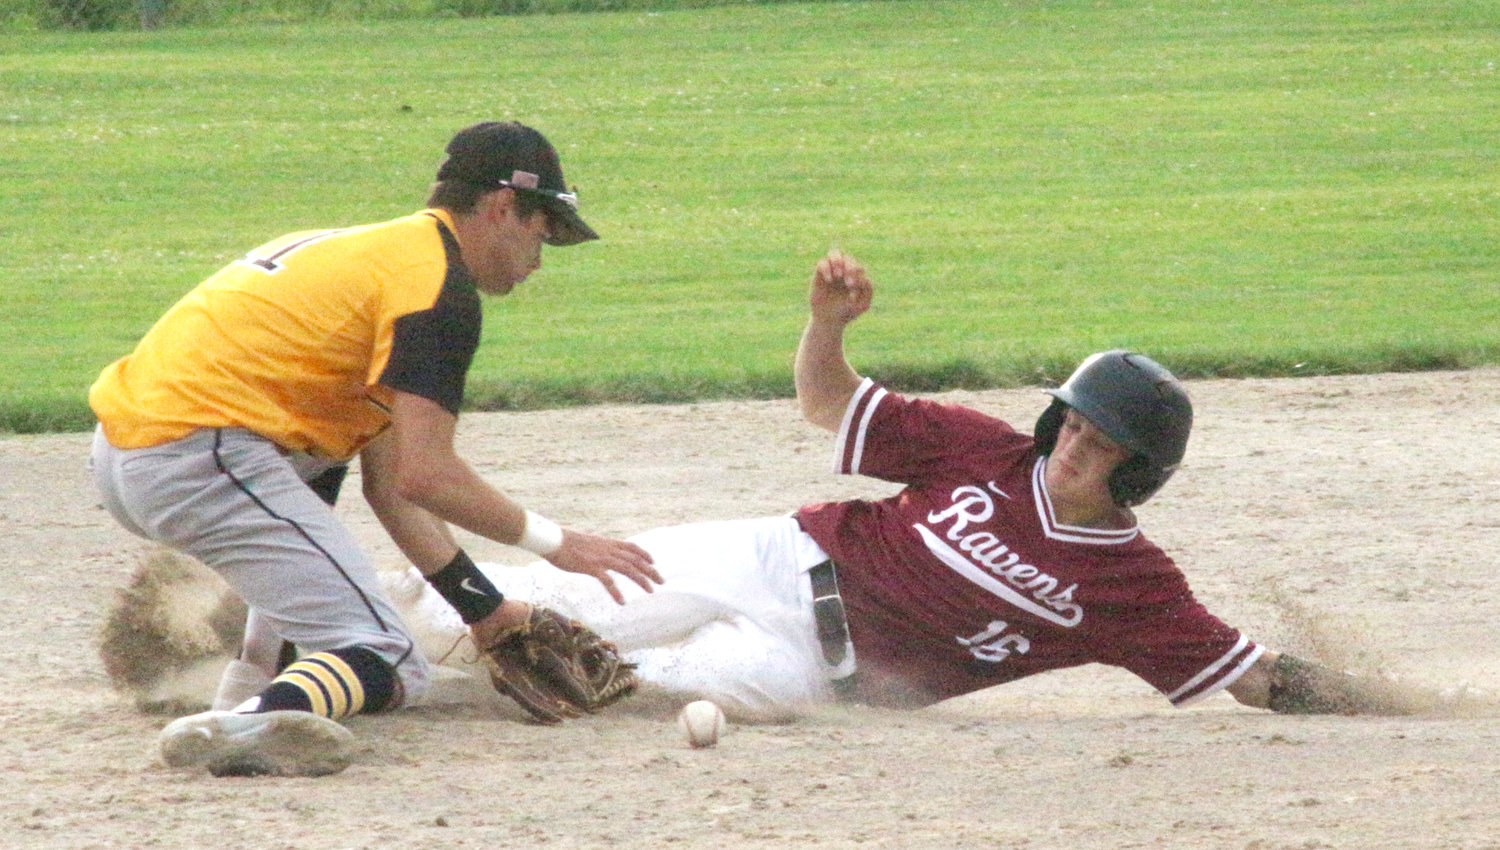 Hillcrest Academy’s Drew Blauvelt slides safely into second base during their June 26 game against Louisa-Muscatine.